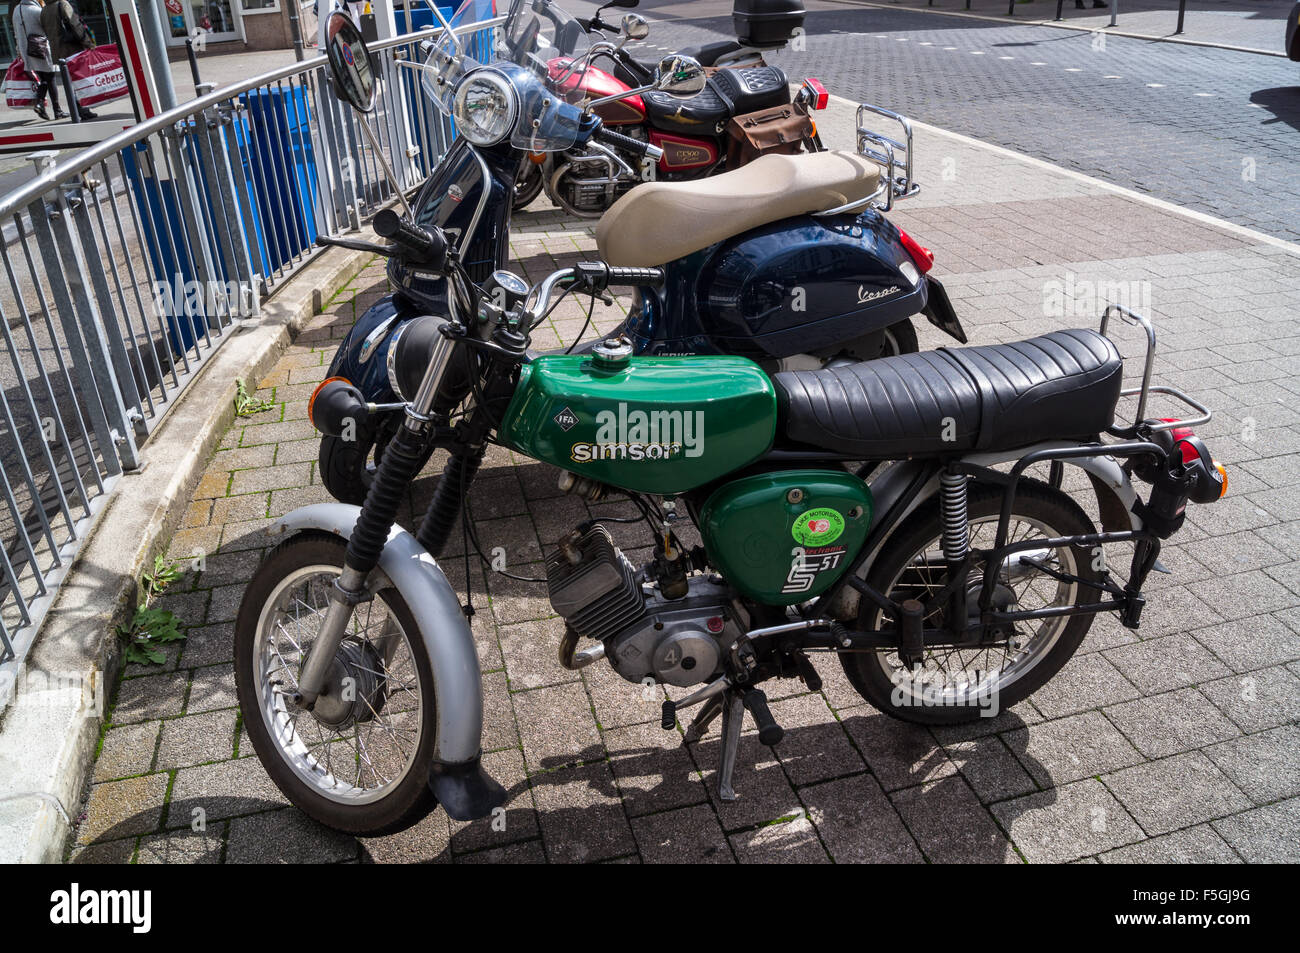 Simson S51 motorcycle, 1980 s, Trier, Germany Stock Photo - Alamy